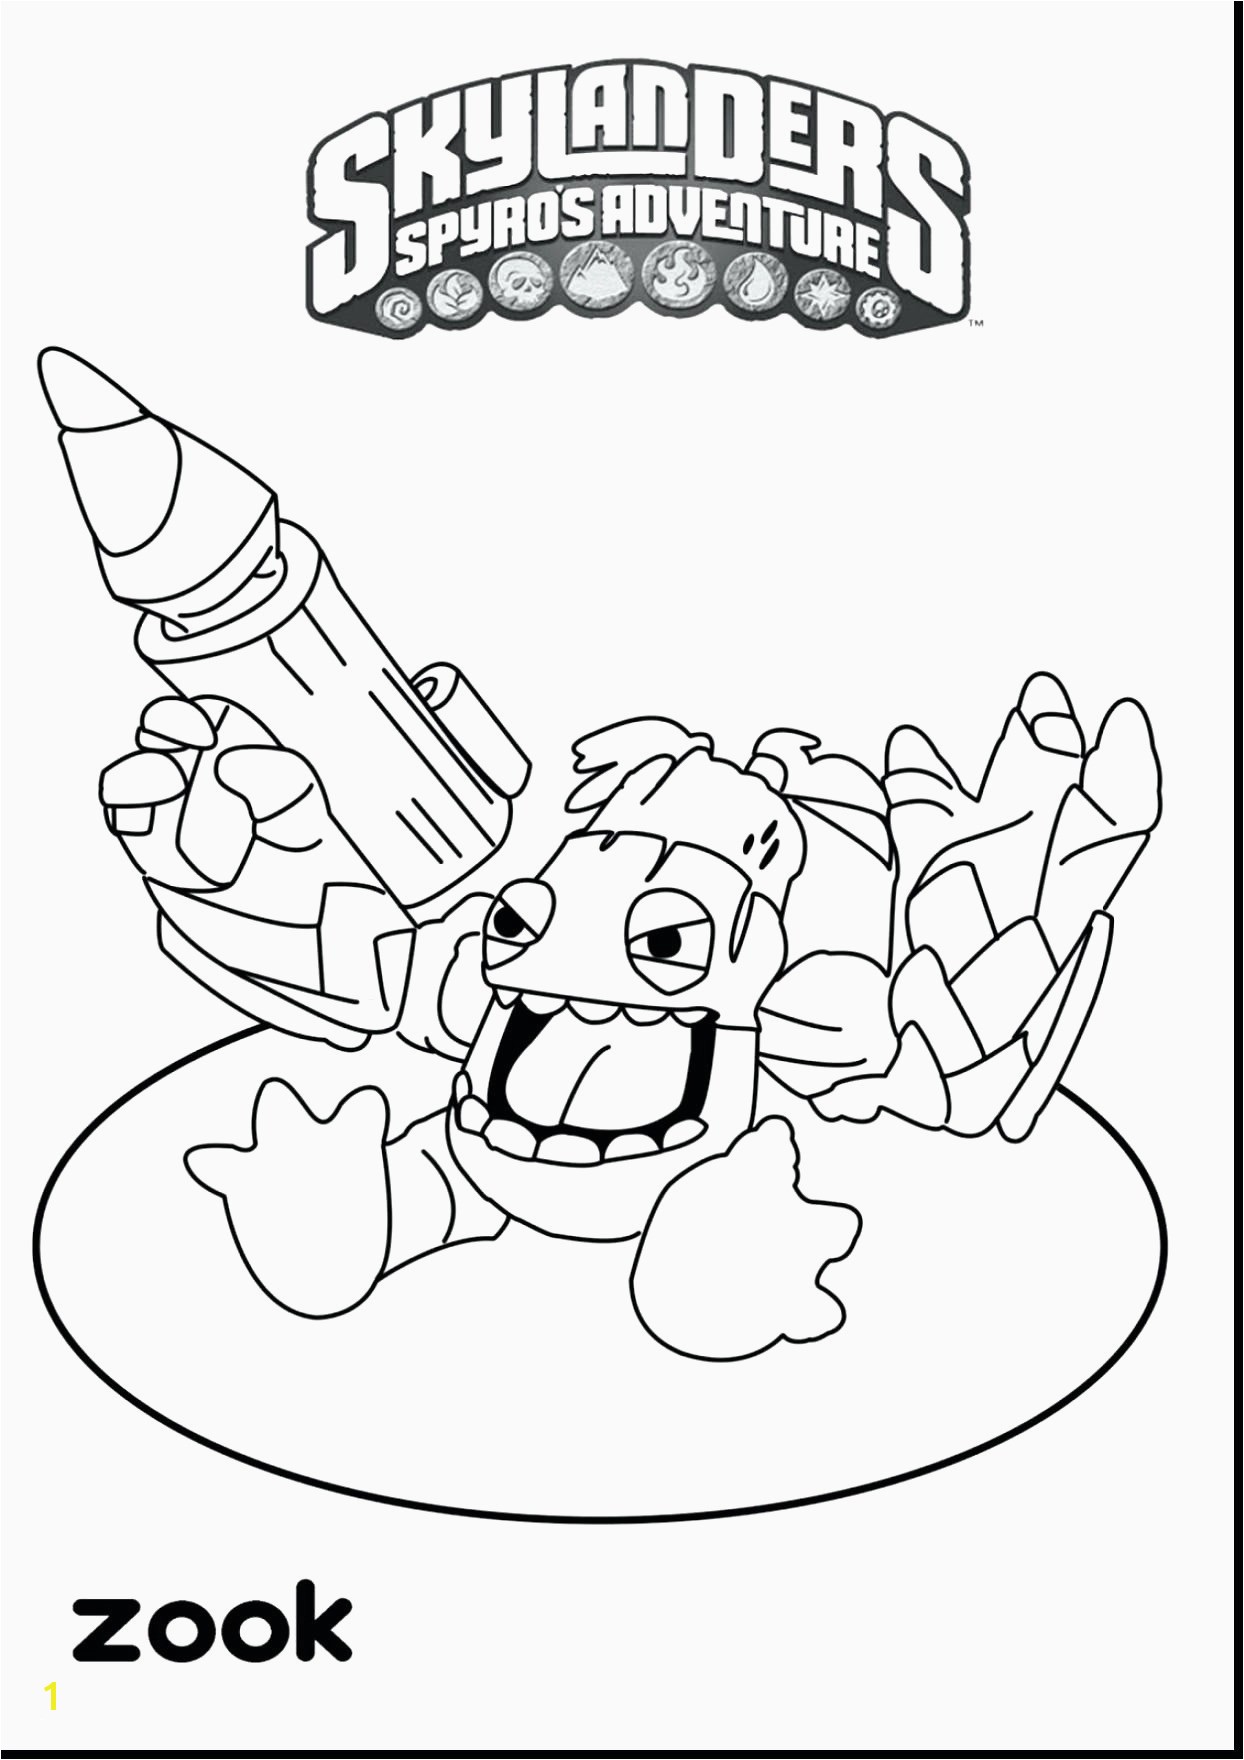 Turtle Coloring Pages Printable Turtle Coloring Pages Coloring Pages for Kides Beautiful Coloring